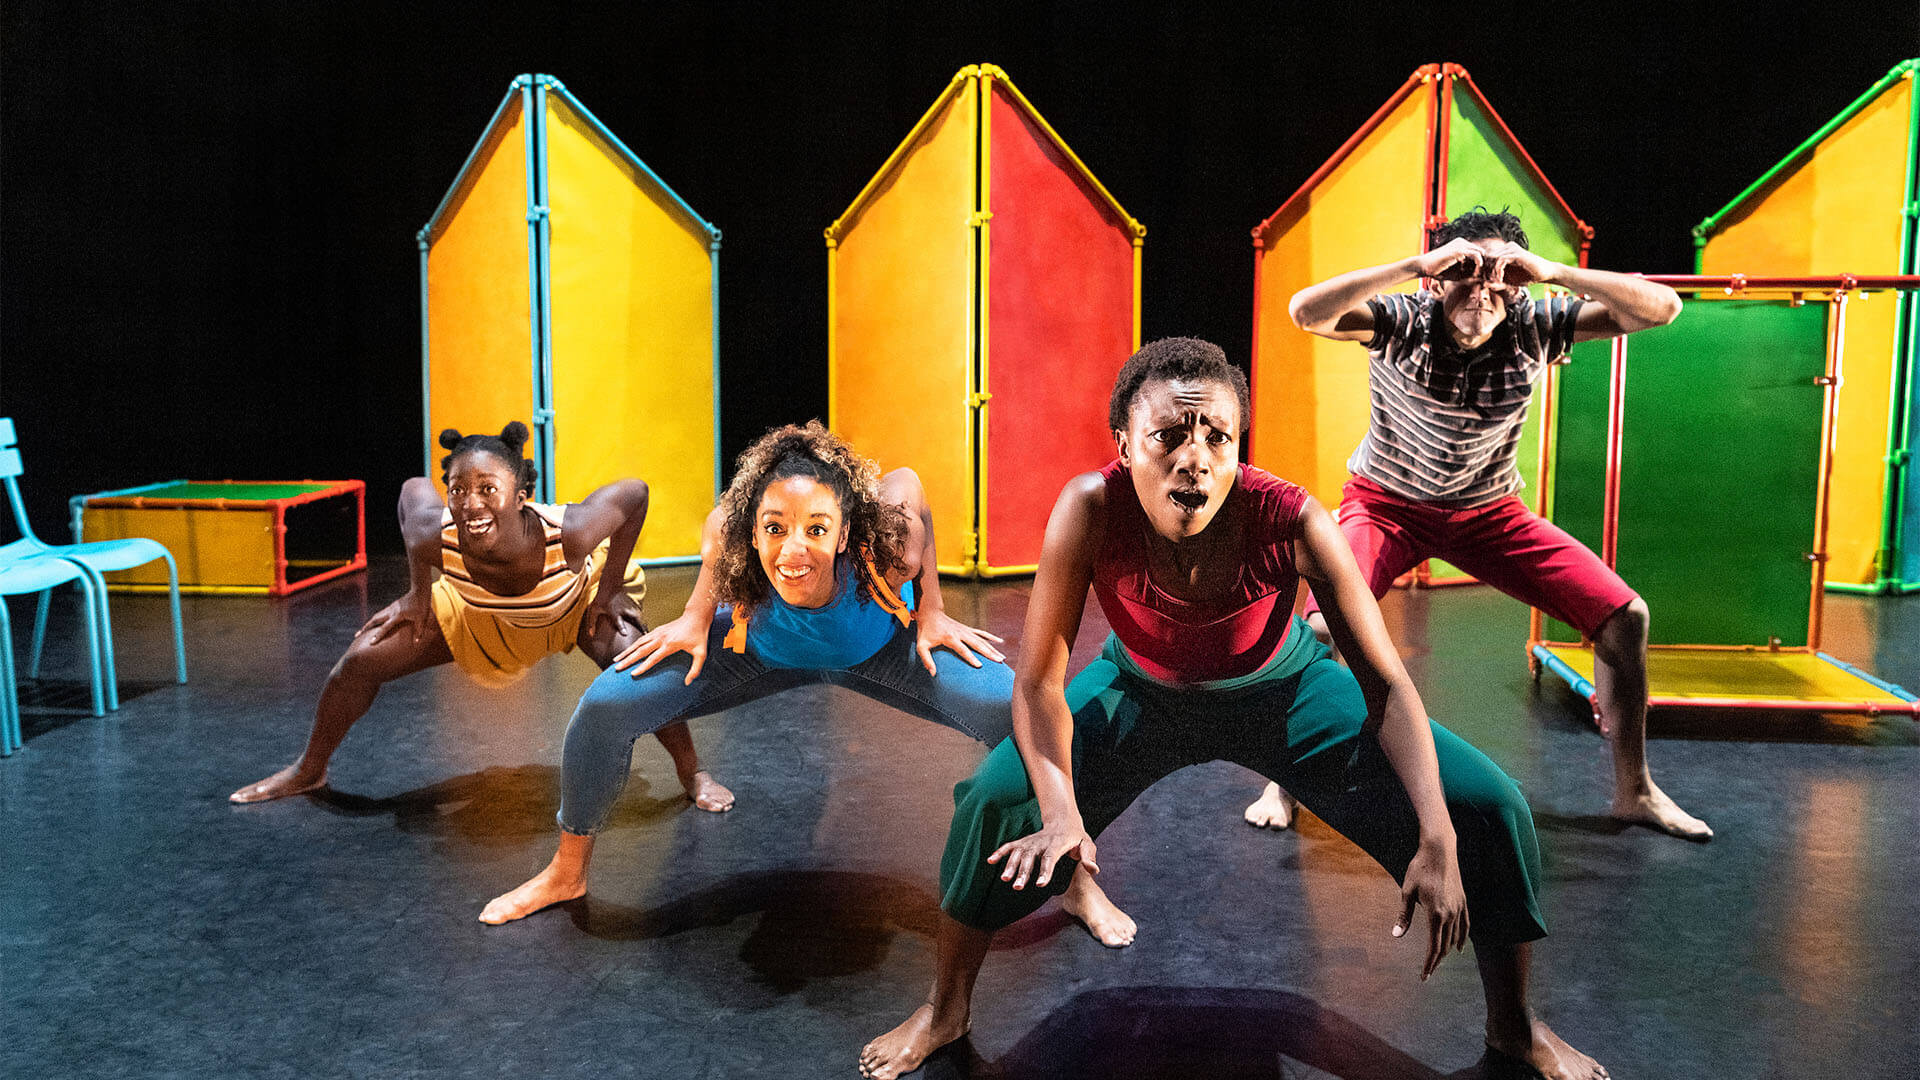 Four performers group together on set which combines different pastel colours: yellow, red, orange, light green, light blue, dark green. It looks a little bit like a kids’ playground.